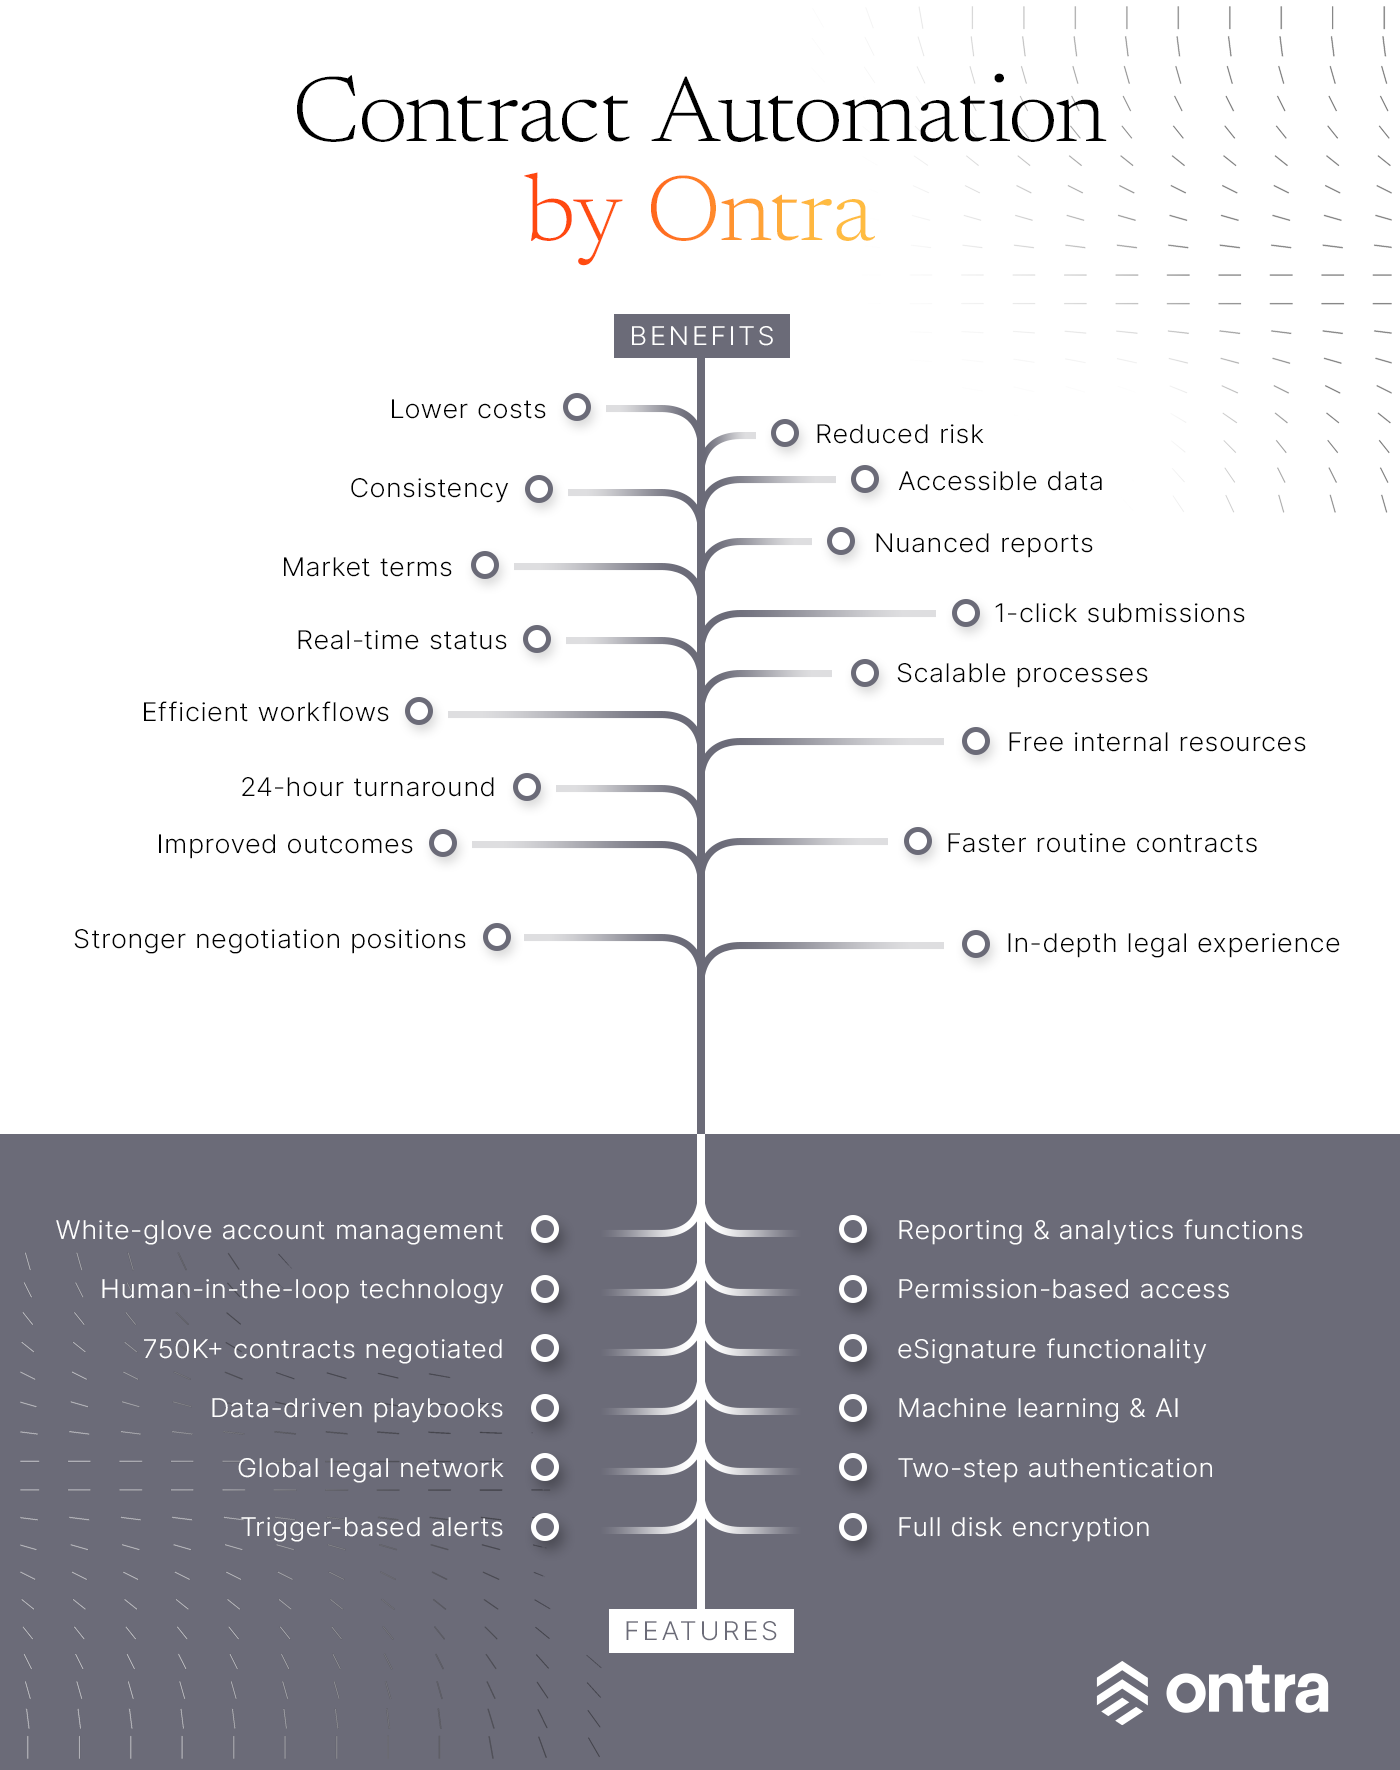 Contract Automation by Ontra optimizes routine contract creation for asset management firms.